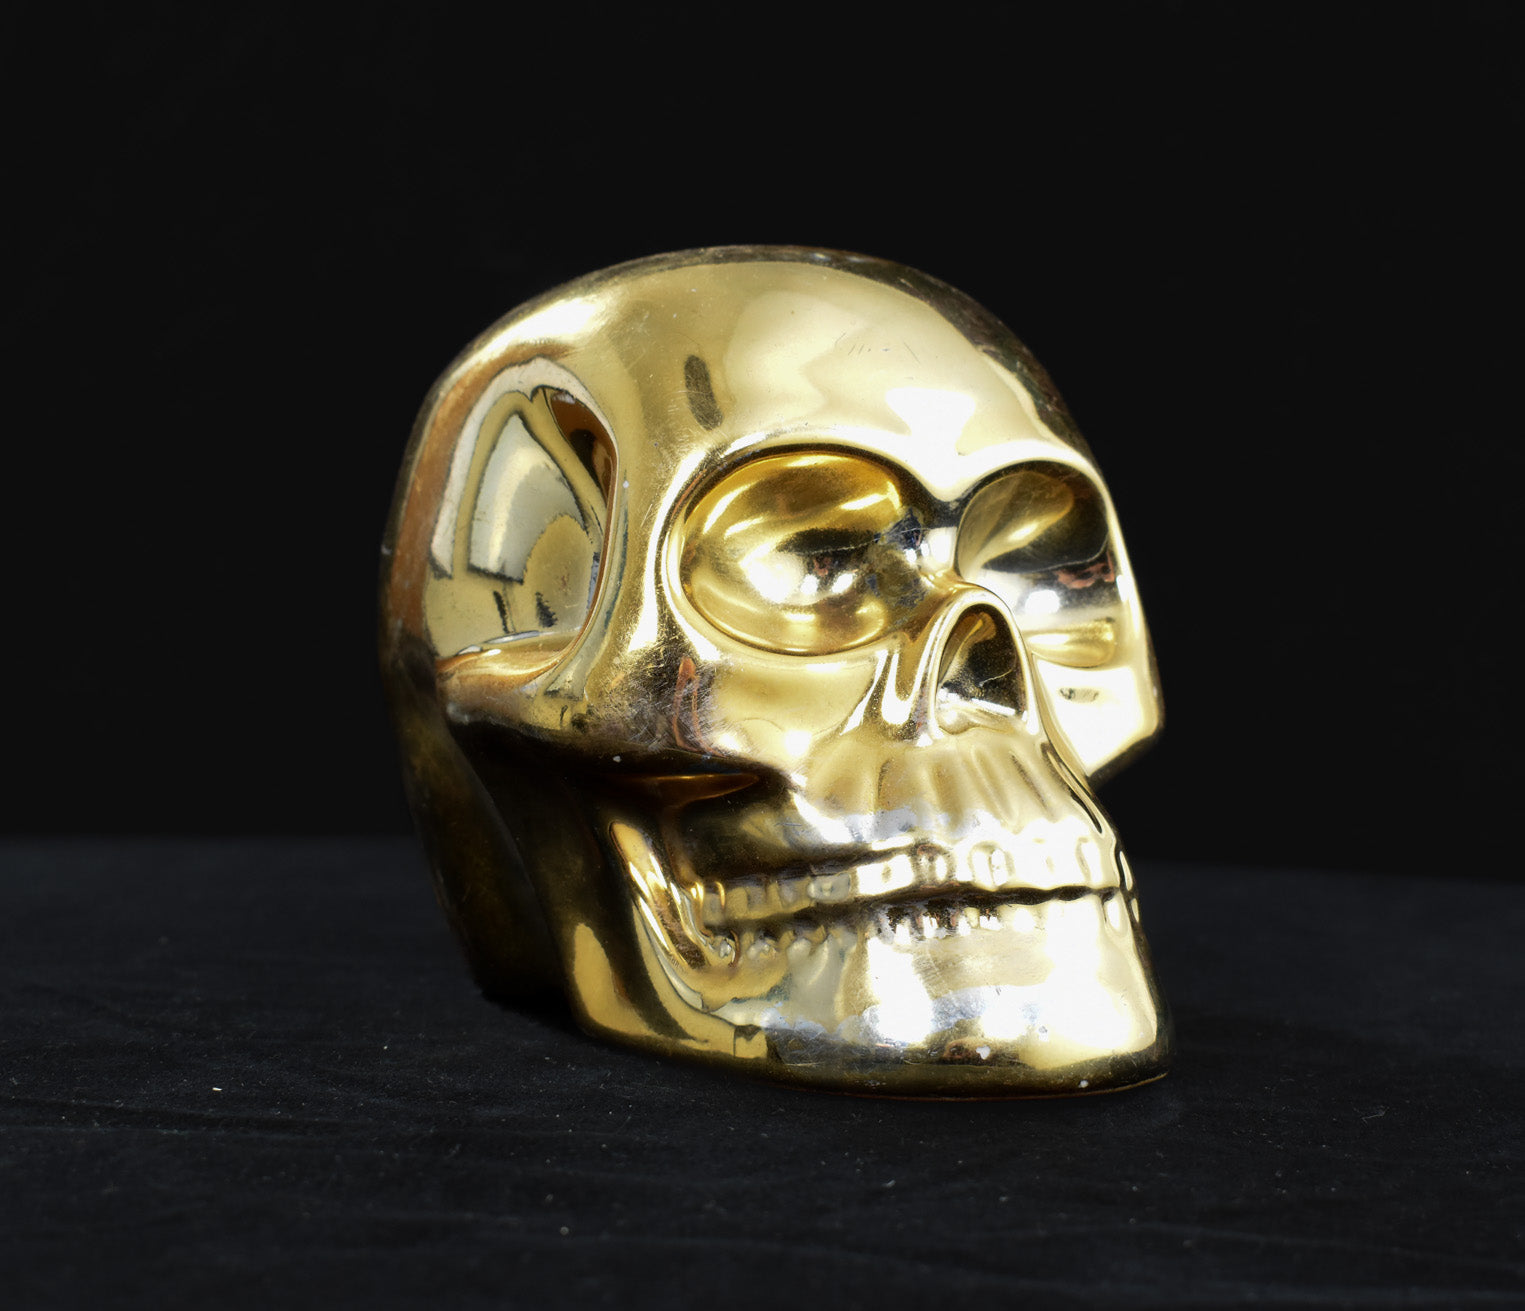 Electroplated Shiny Gold Cranium Skull Head Money Bank Resin Figurine 6in x 5in